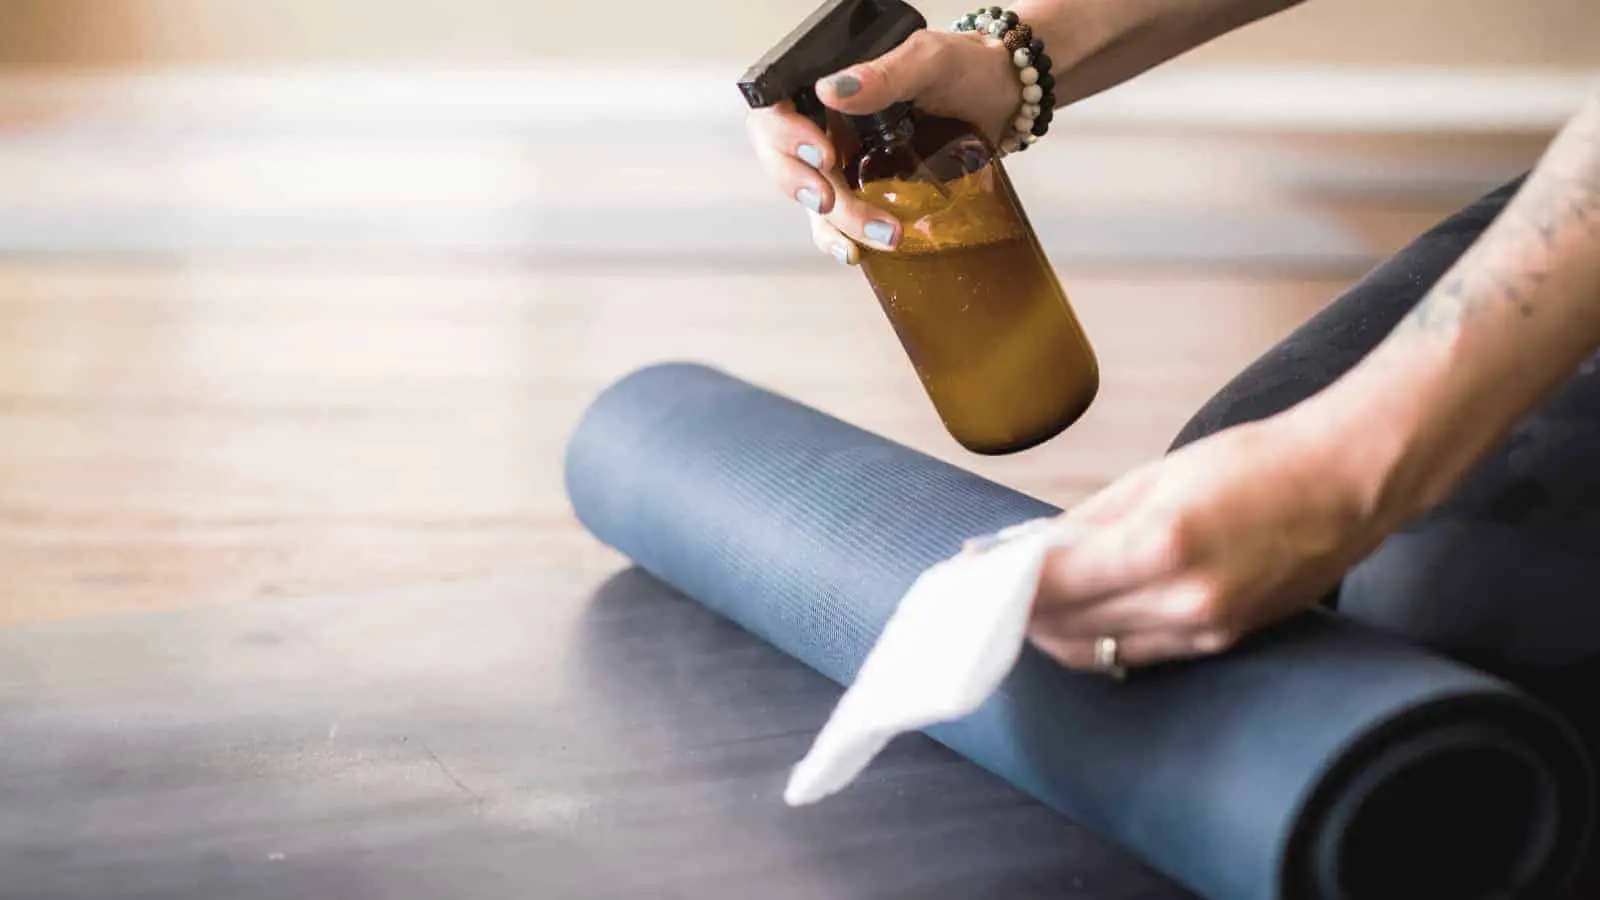 How to clean natural rubber yoga mat